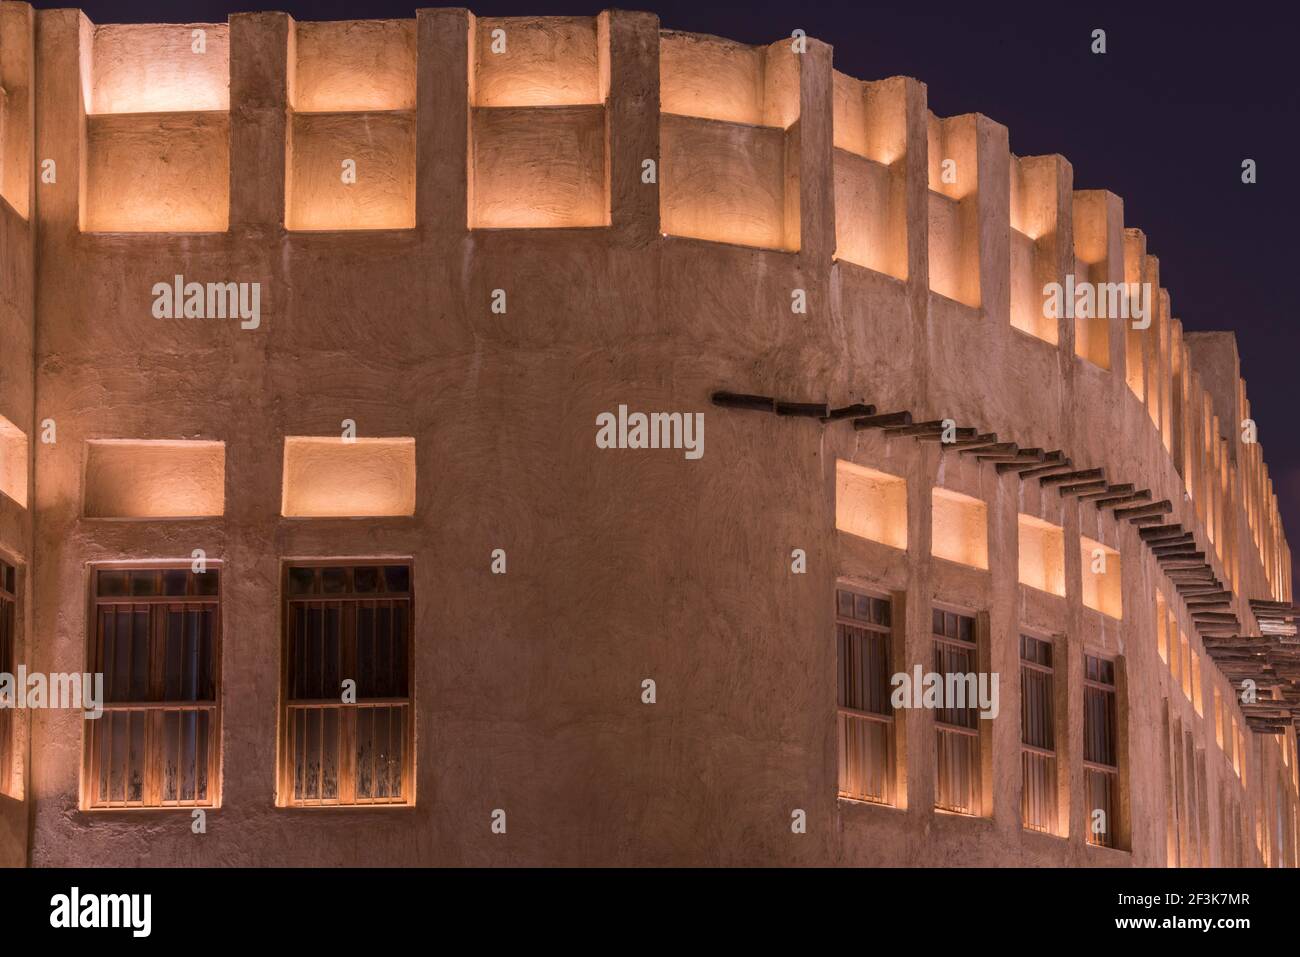 Doha,Qatar- March 04,2022 : Night views of the traditional Arabic architecture of market Souk Waqif. Stock Photo